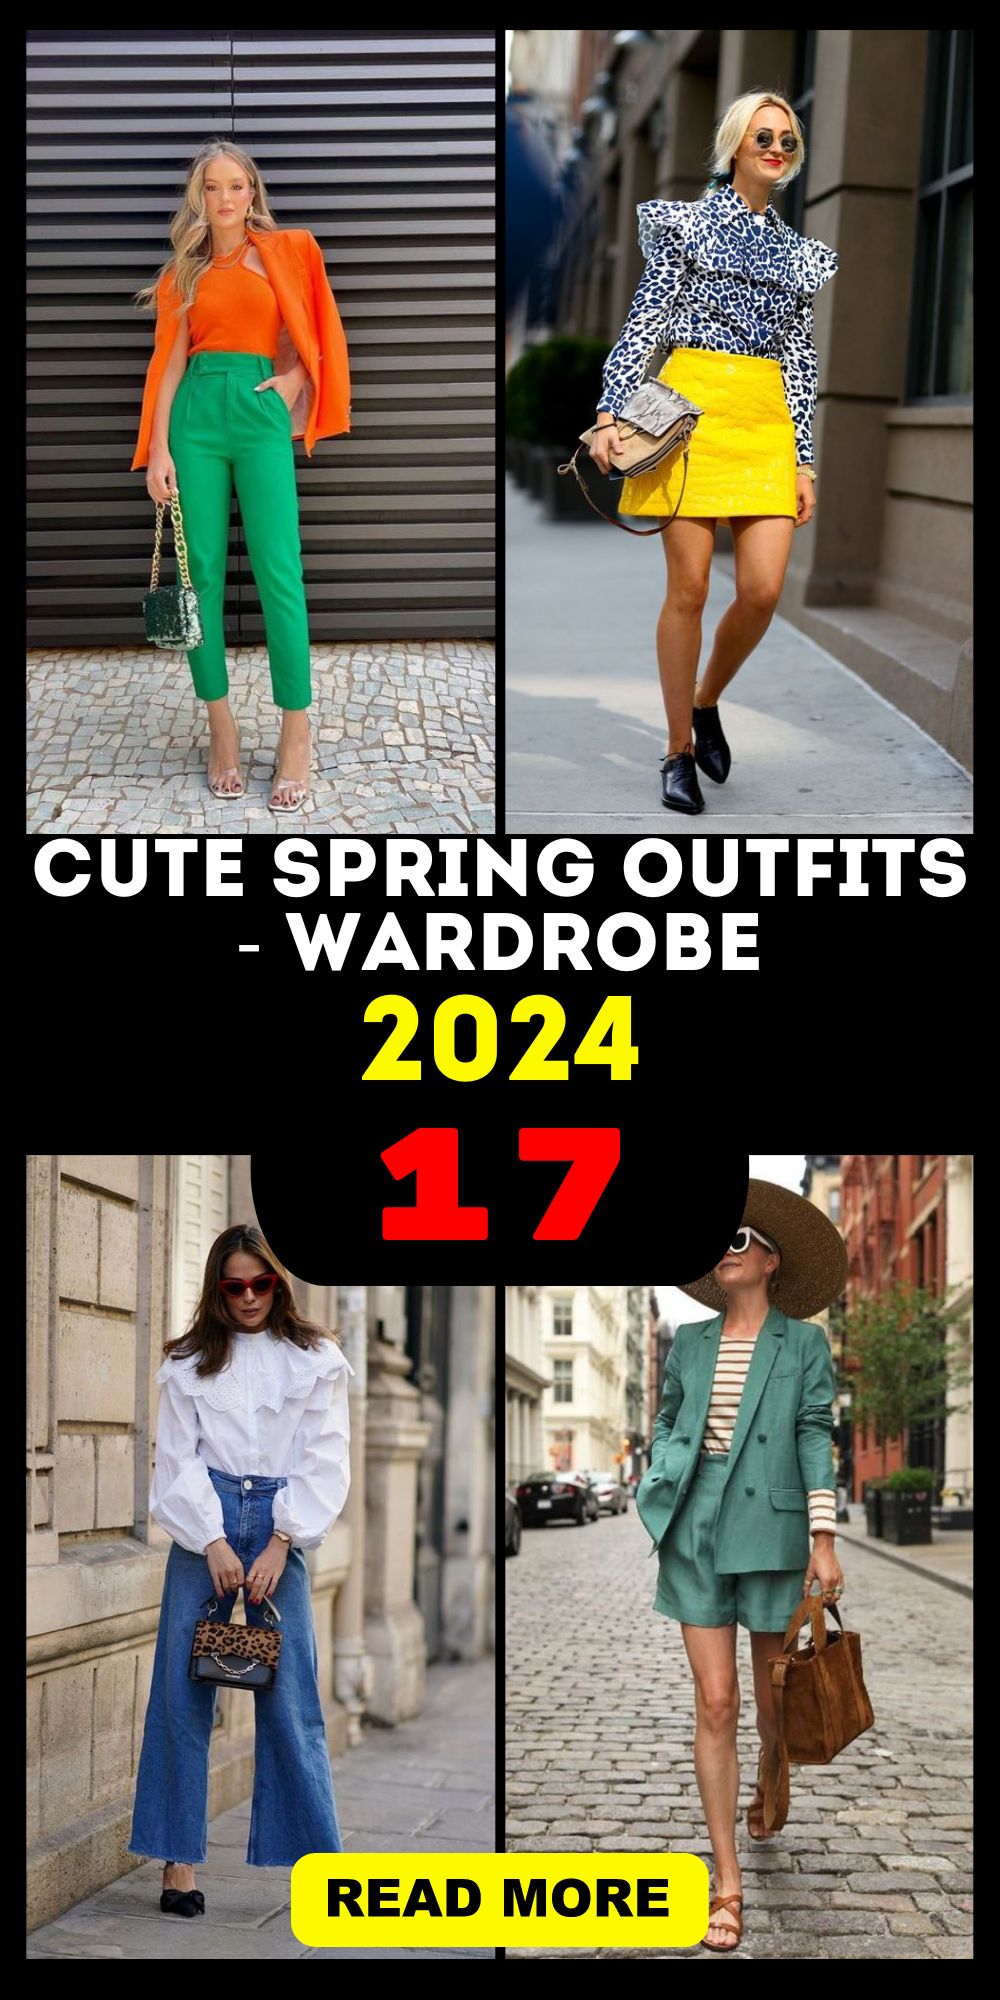 Cute Spring Outfits 2024: Refresh Your Casual Wardrobe Essentials